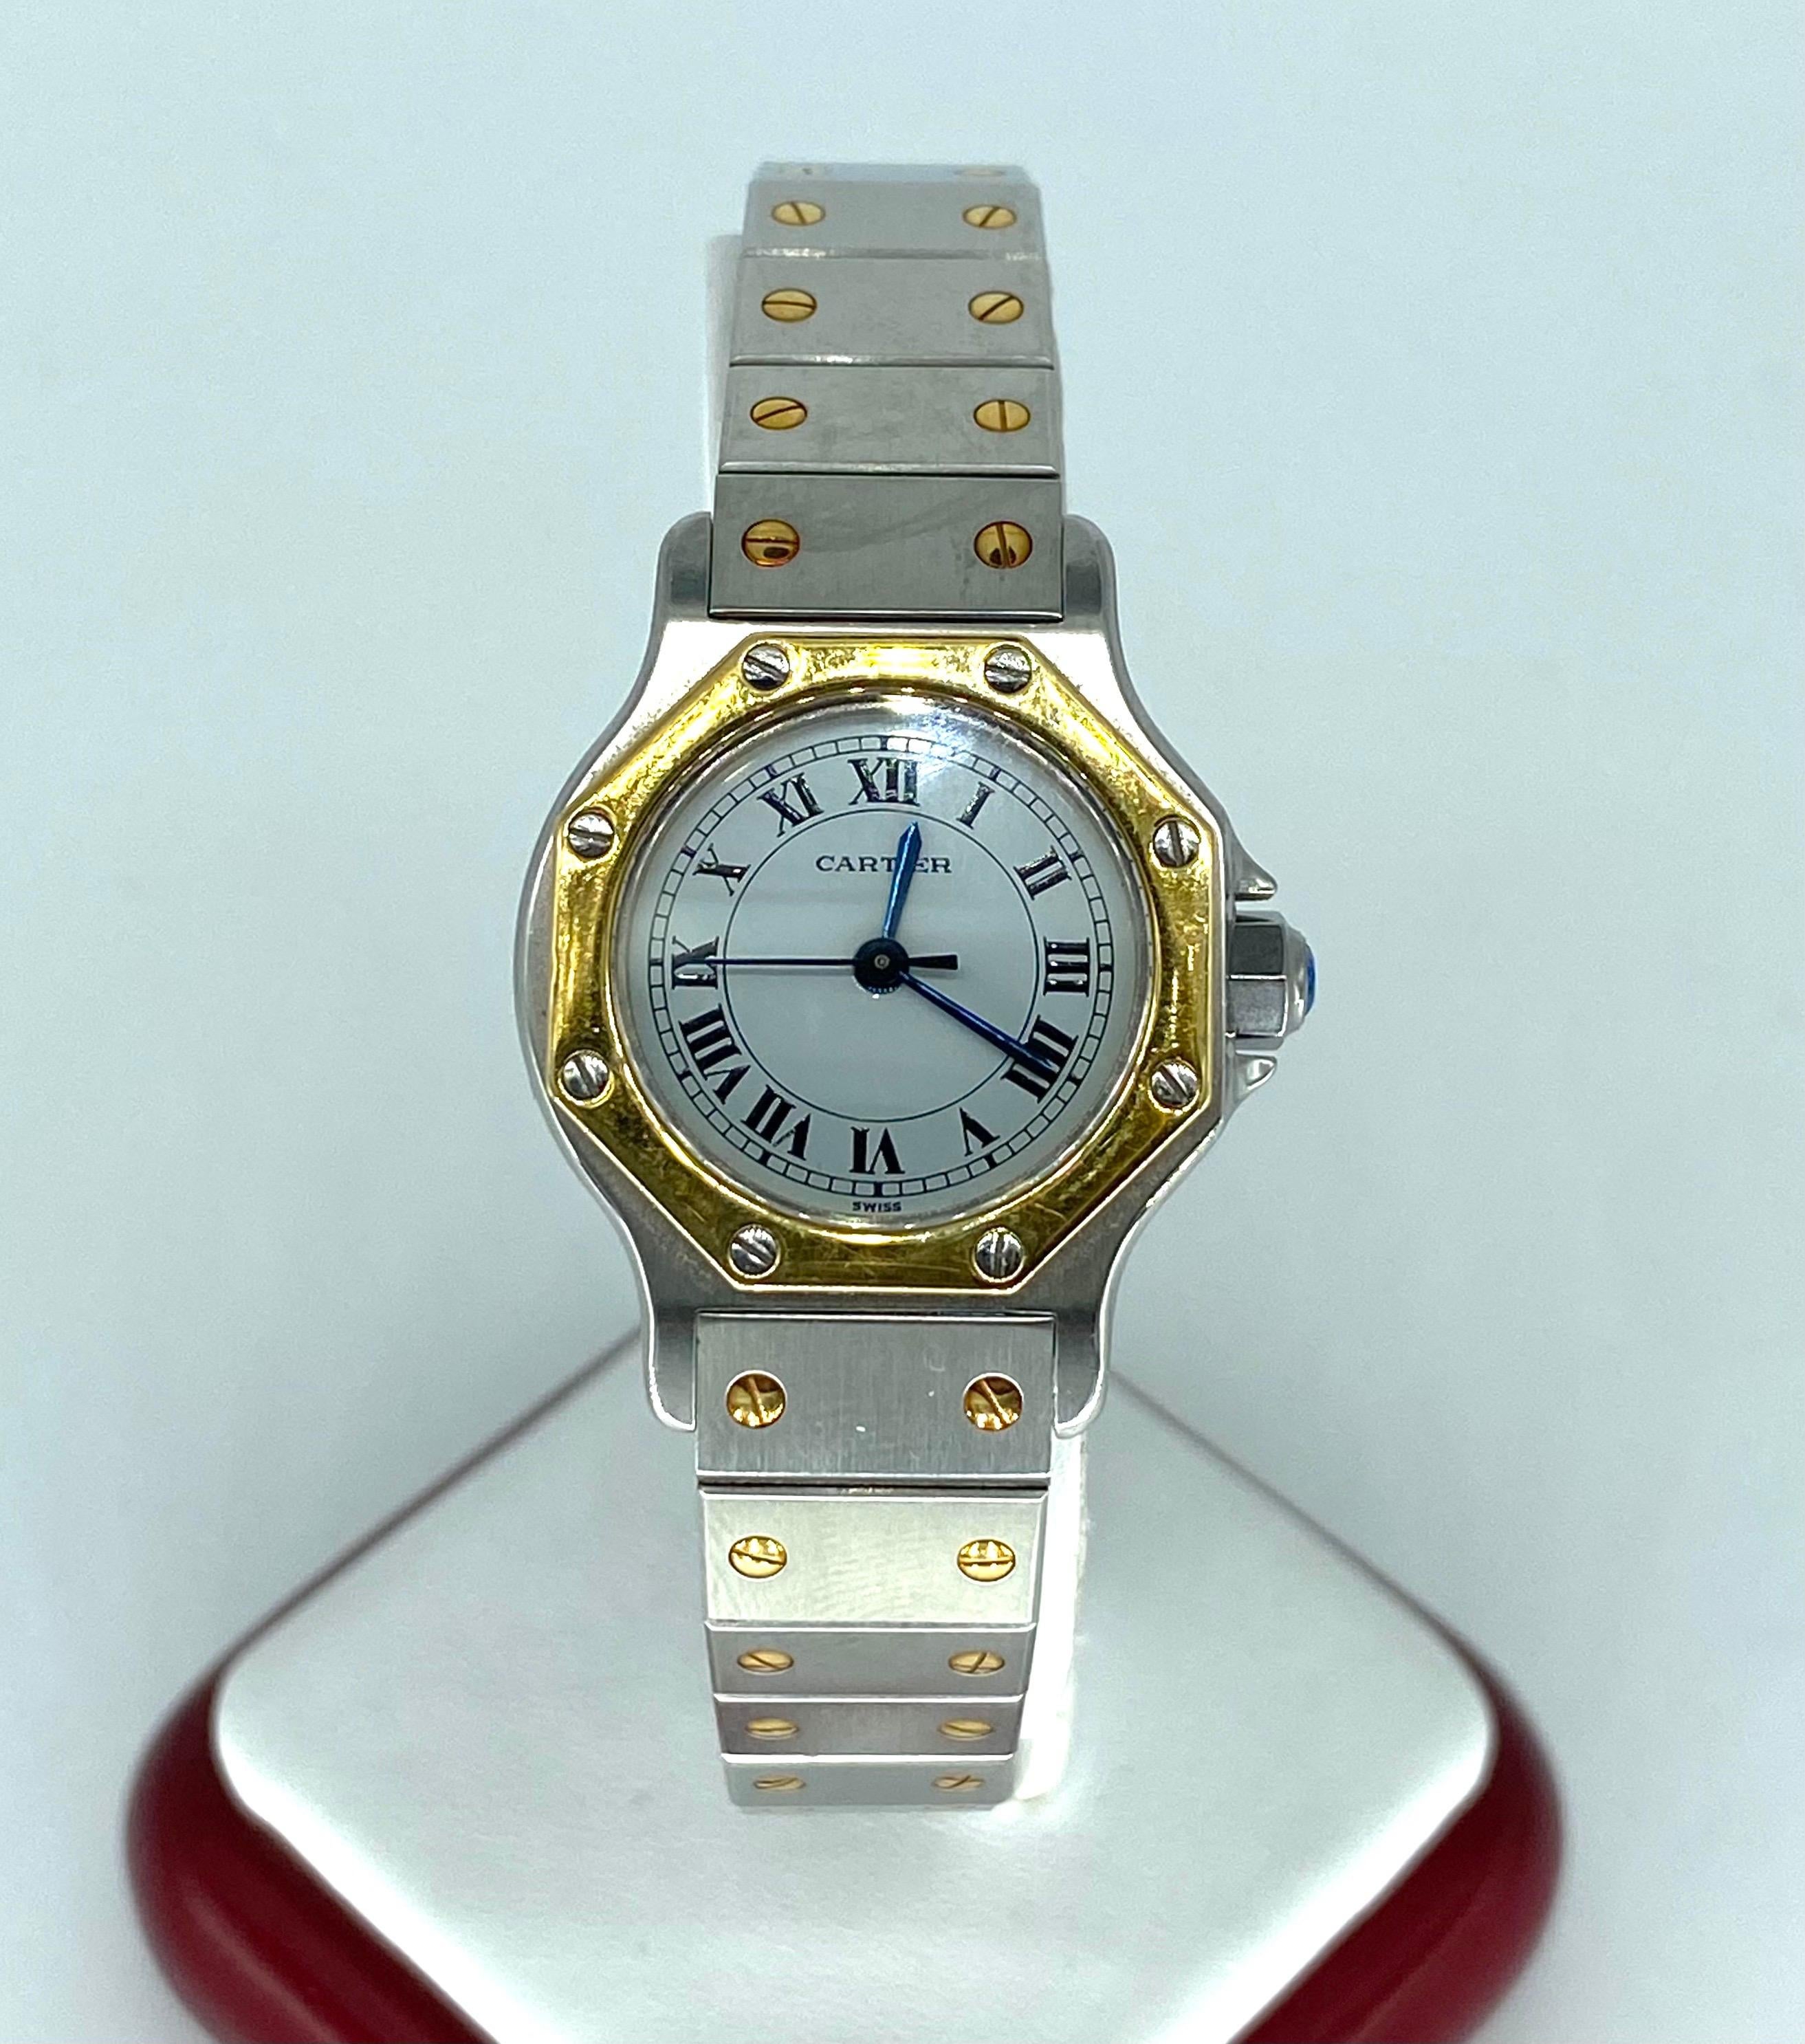 Silver-tone stainless steel case with a two-tone (silver-tone and yellow gold-tone) 18kt yellow gold and stainless steel bracelet. Fixed yellow gold-tone 18kt yellow gold bezel. White dial with blued-steel sword-shaped hands and Roman numeral hour